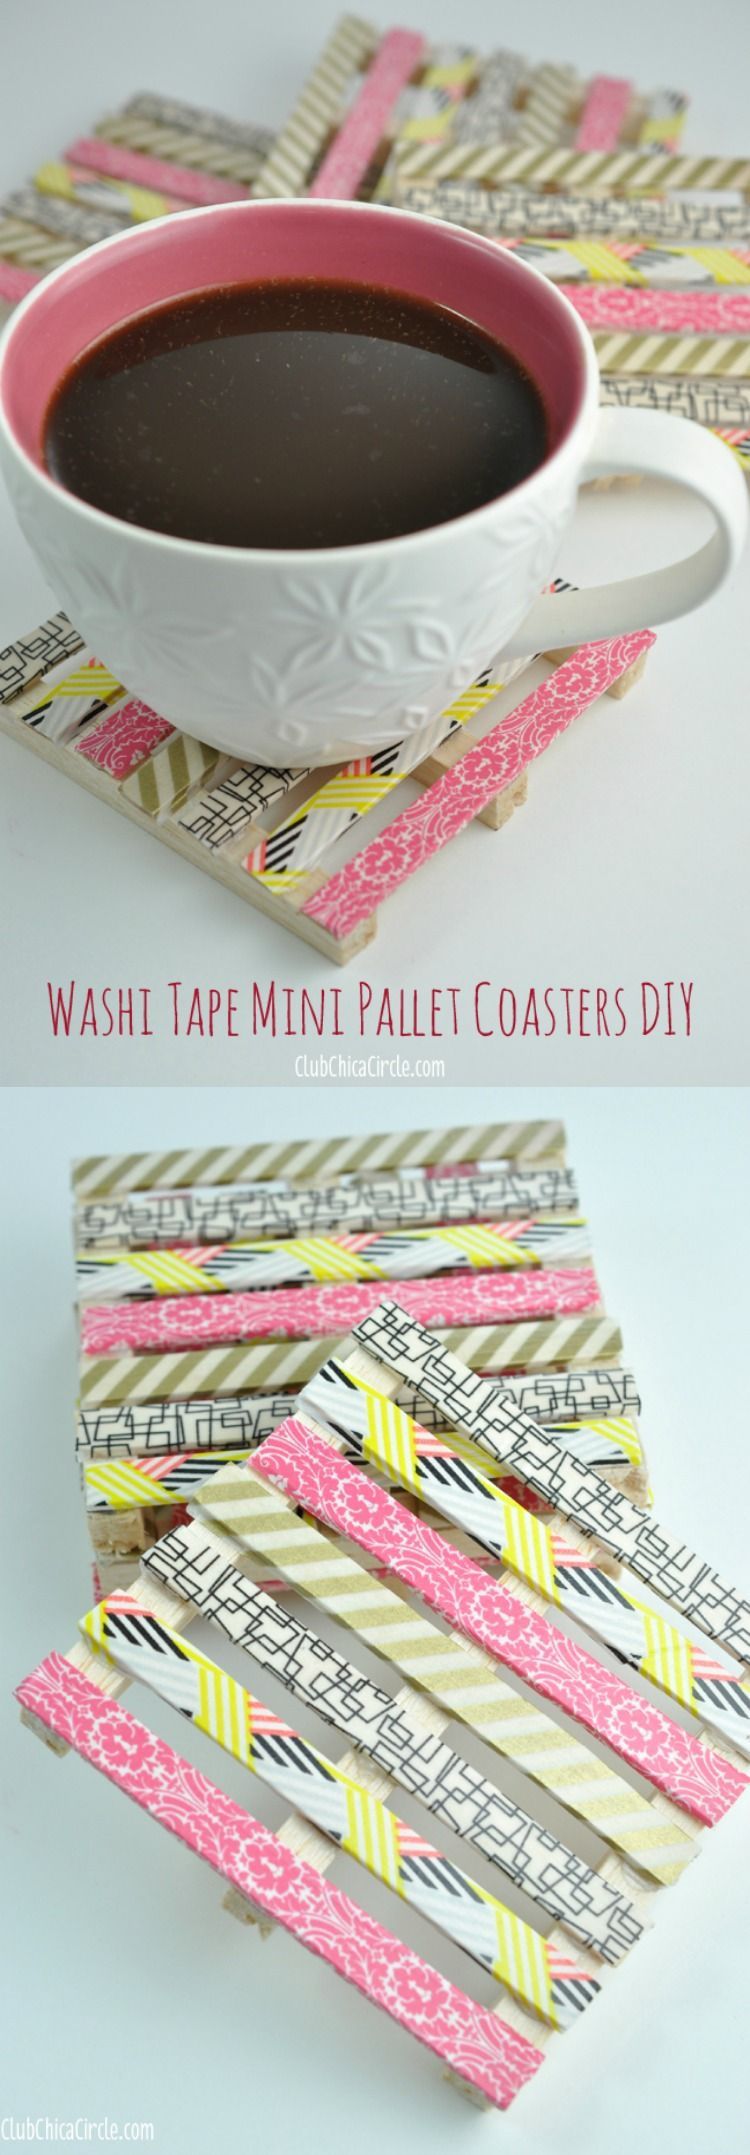 Pauline shows you how to create mini wood pallet DIY coasters using popsicle sticks, small wood piece and washi tape. So cute and